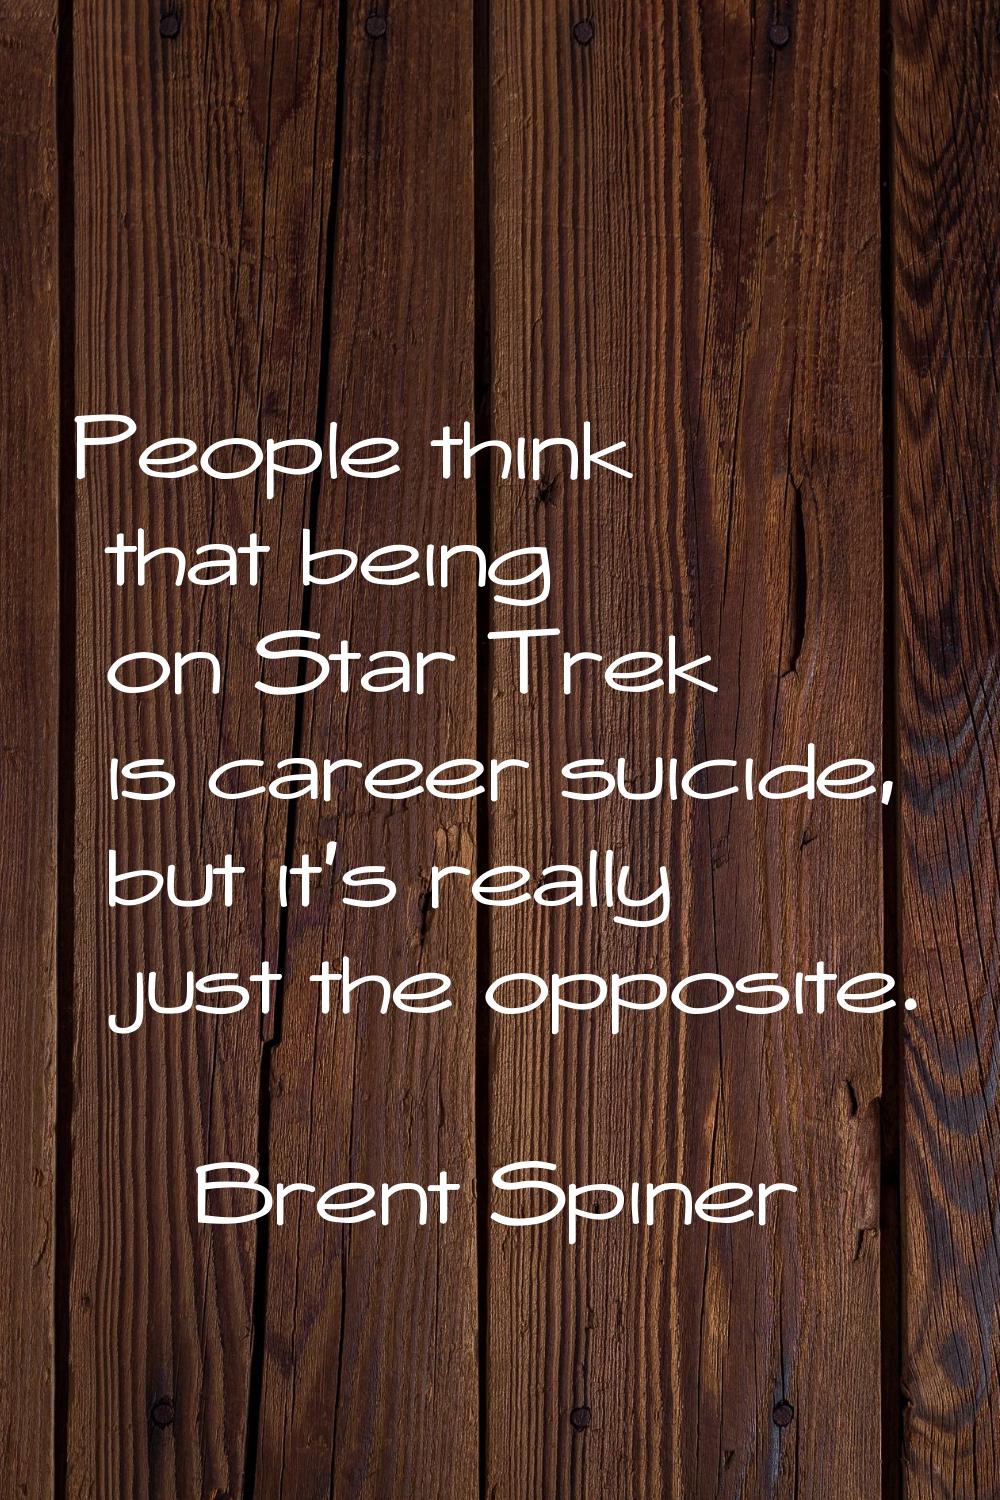 People think that being on Star Trek is career suicide, but it's really just the opposite.